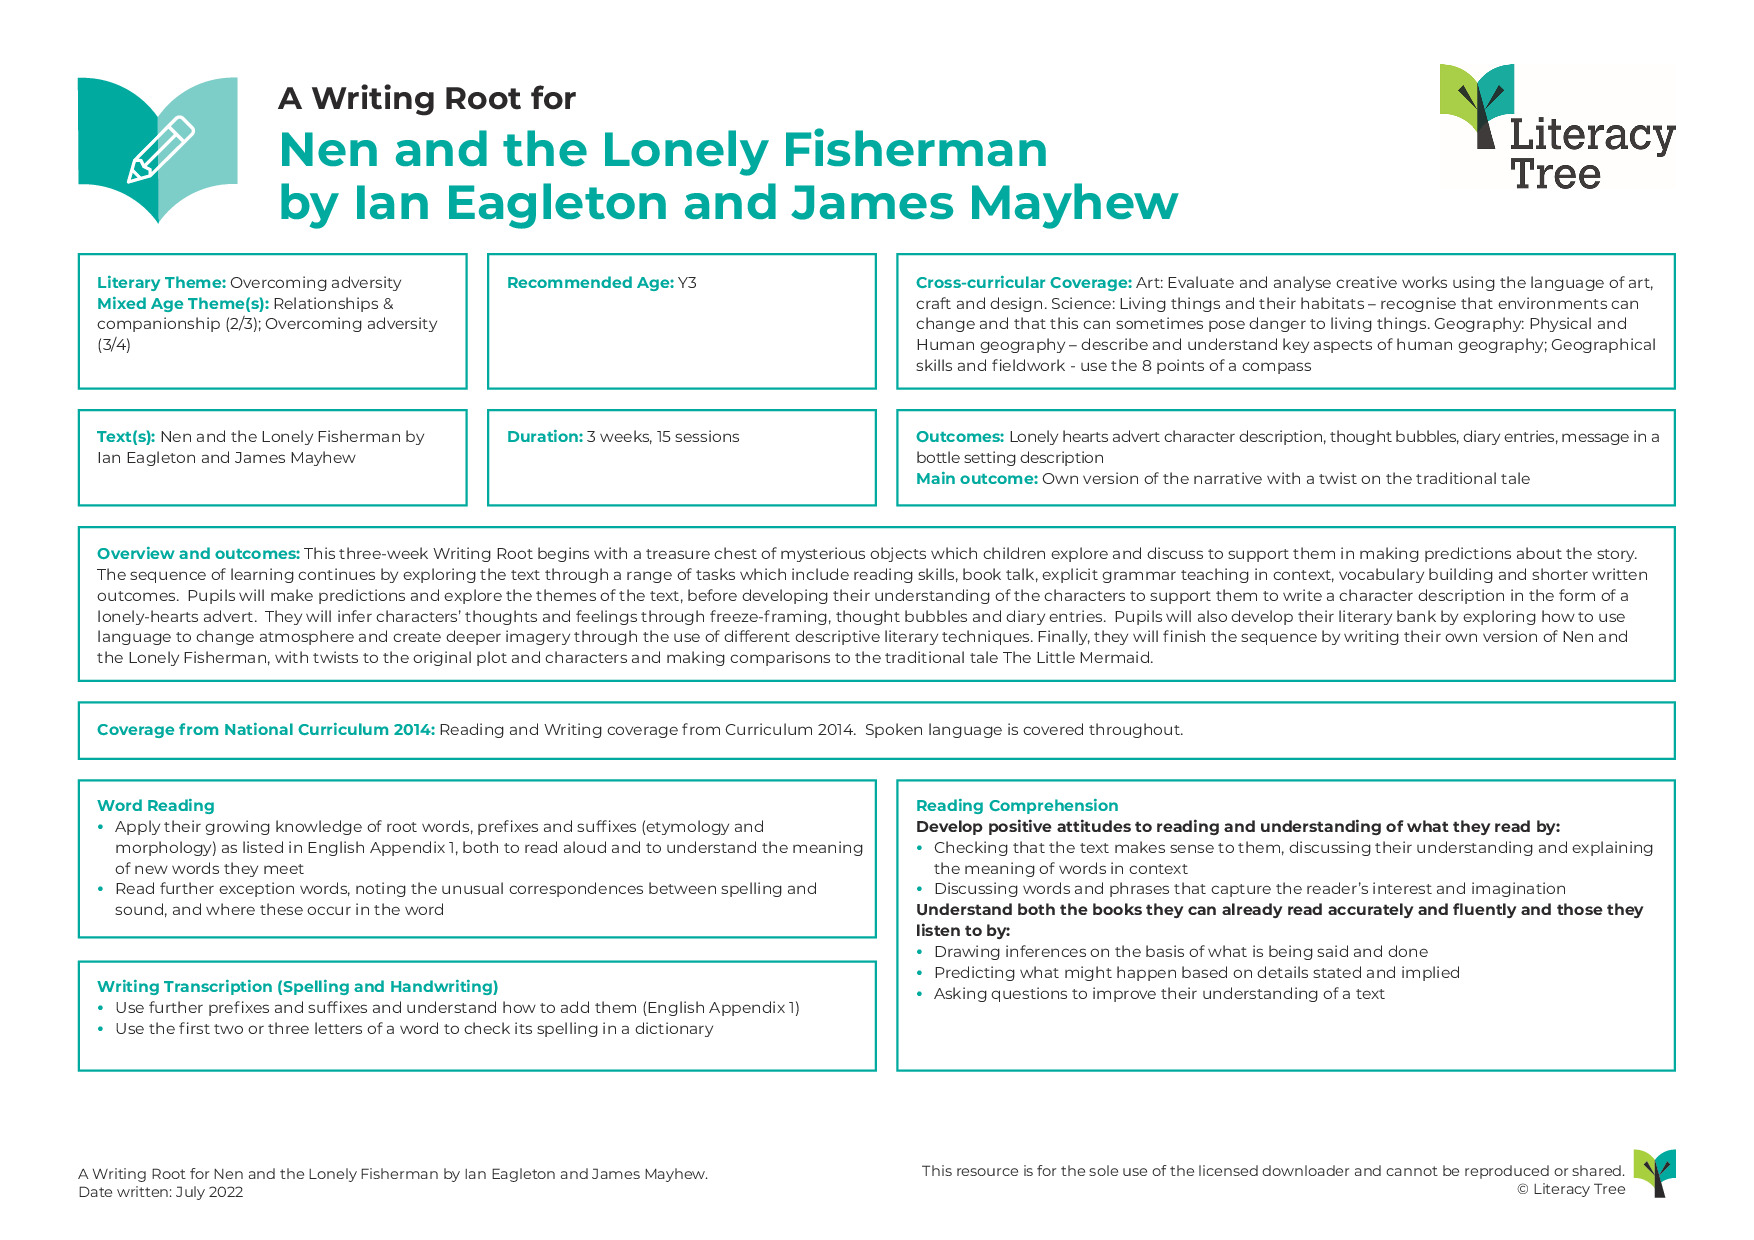 A Writing Root for Nen and the Lonely Fisherman